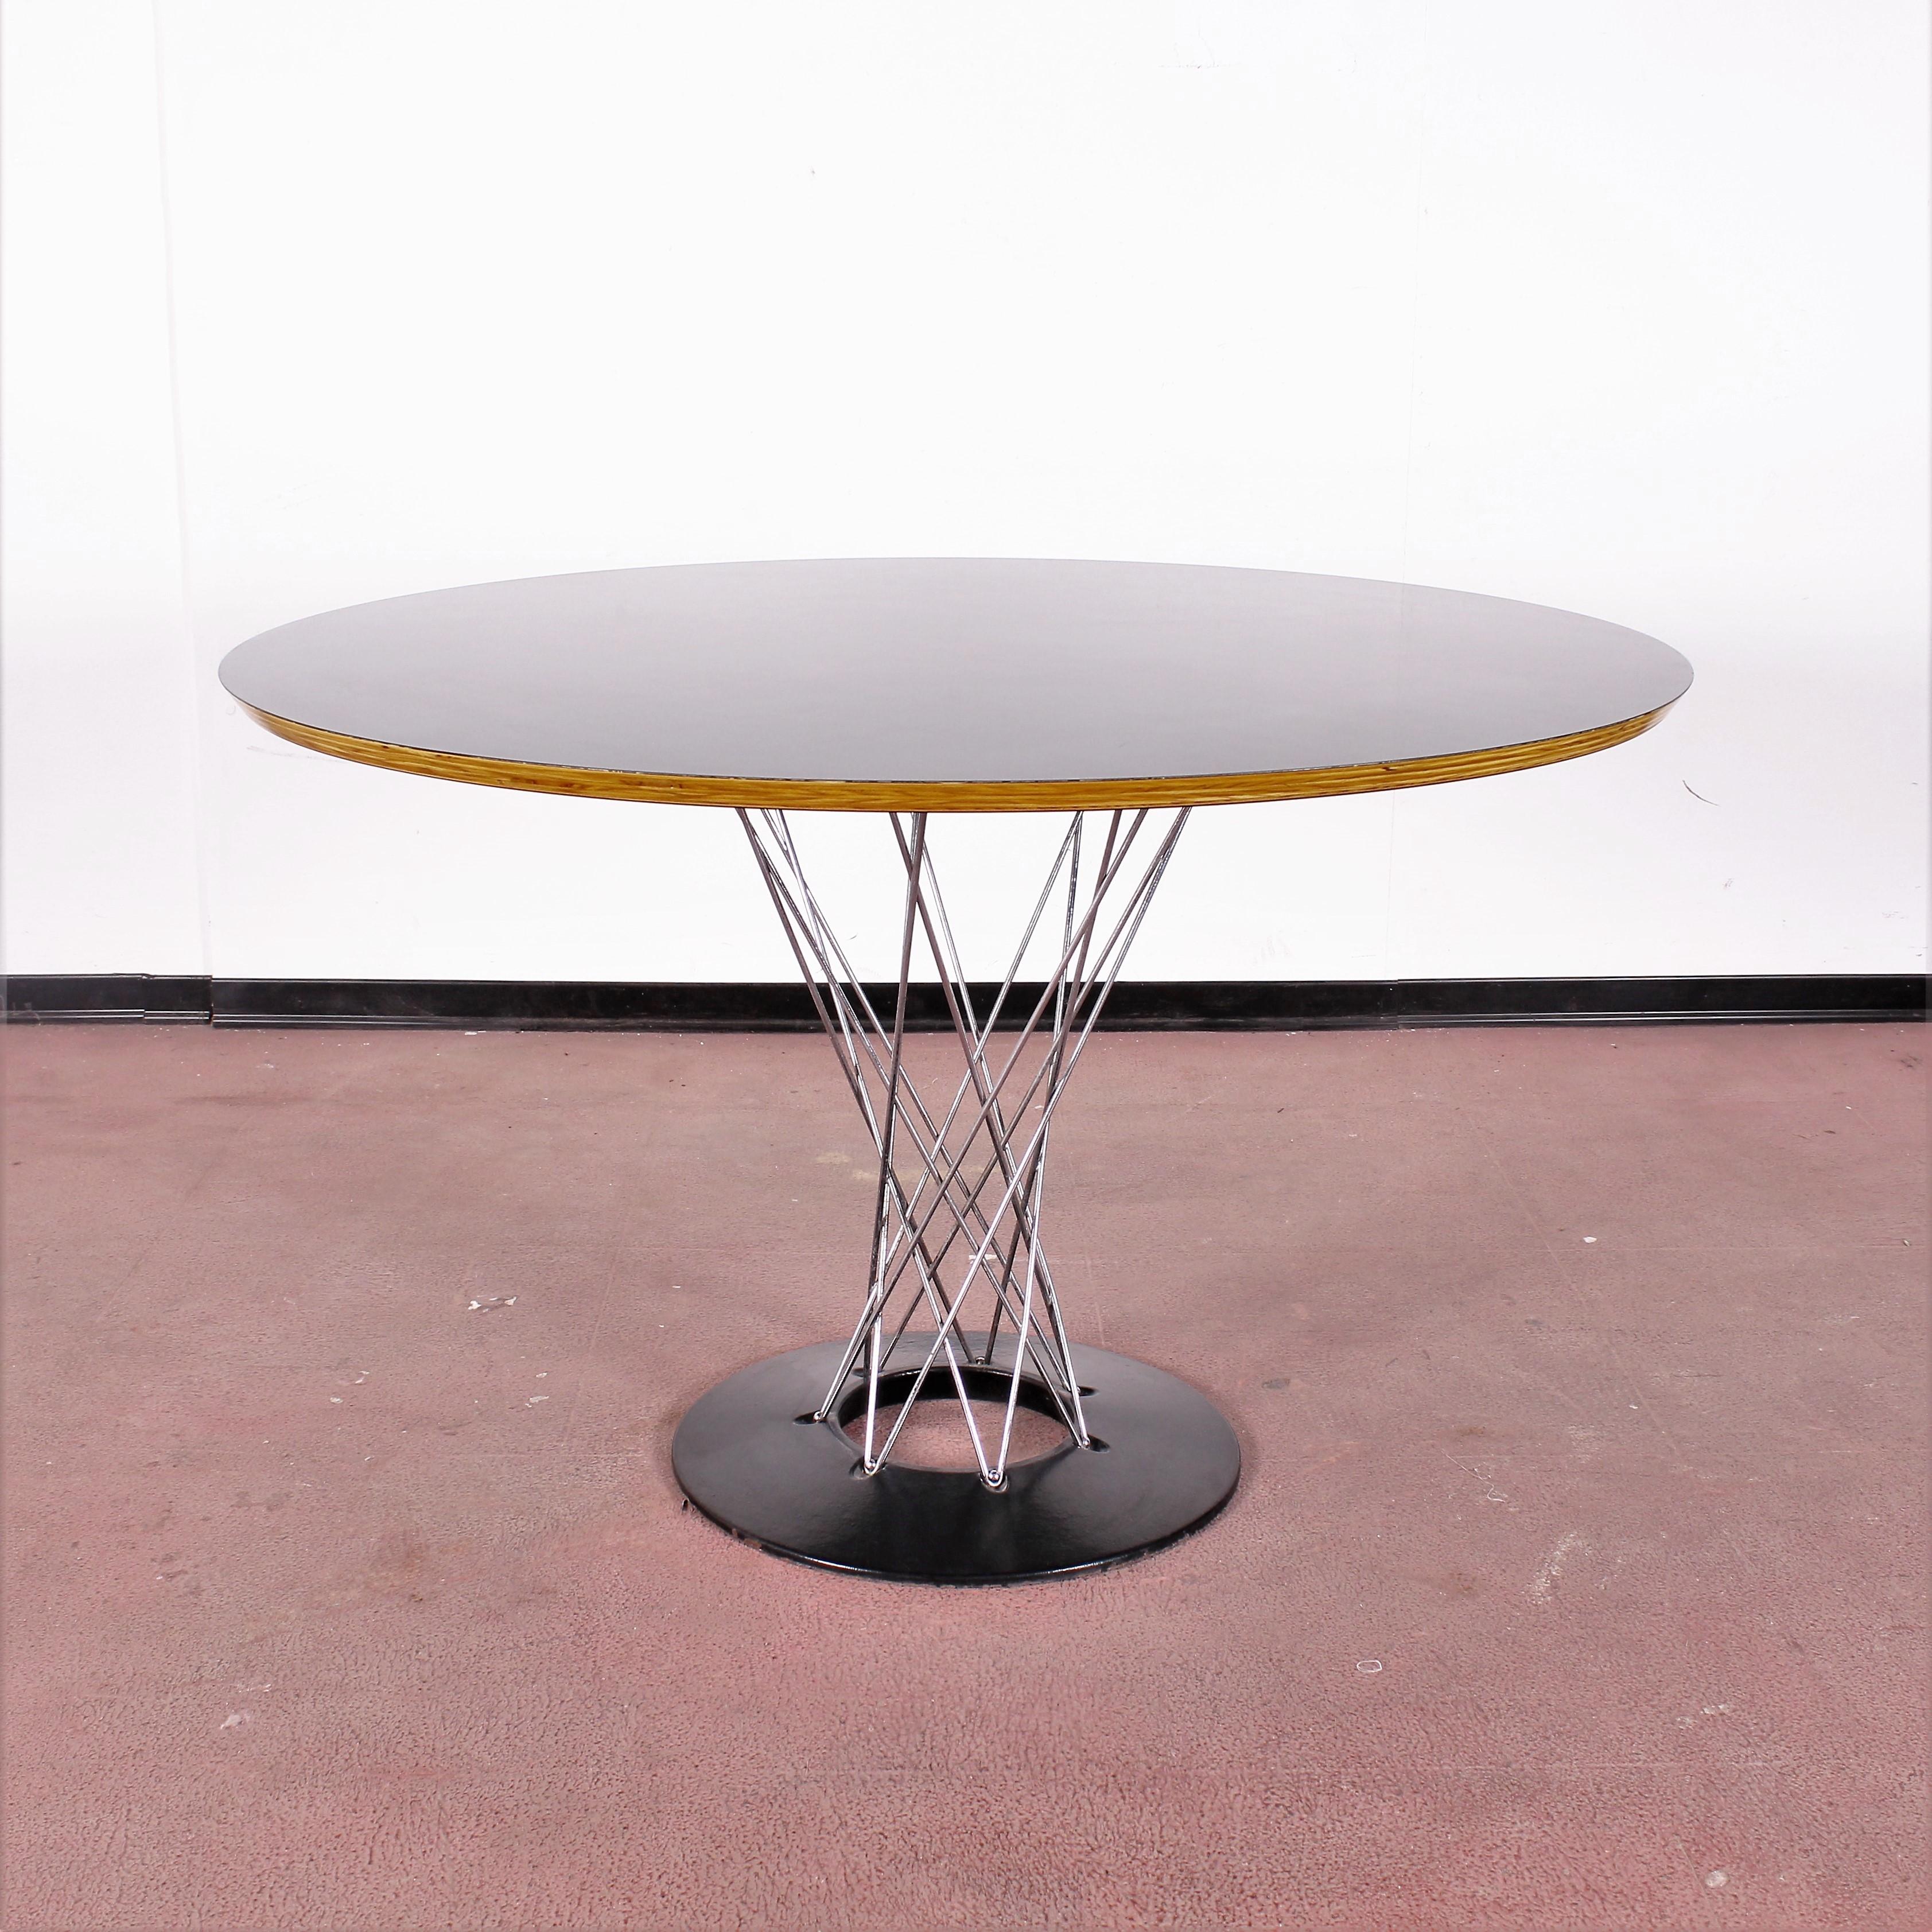 Beautiful dining table with circular top in plywood and black laminate. Feet in chromed twisted steel rods, screwed onto the circular base in black lacquered cast iron, by Isamu Noguchi for Alivar in 1980s.
Wear consistent with age and use.
   